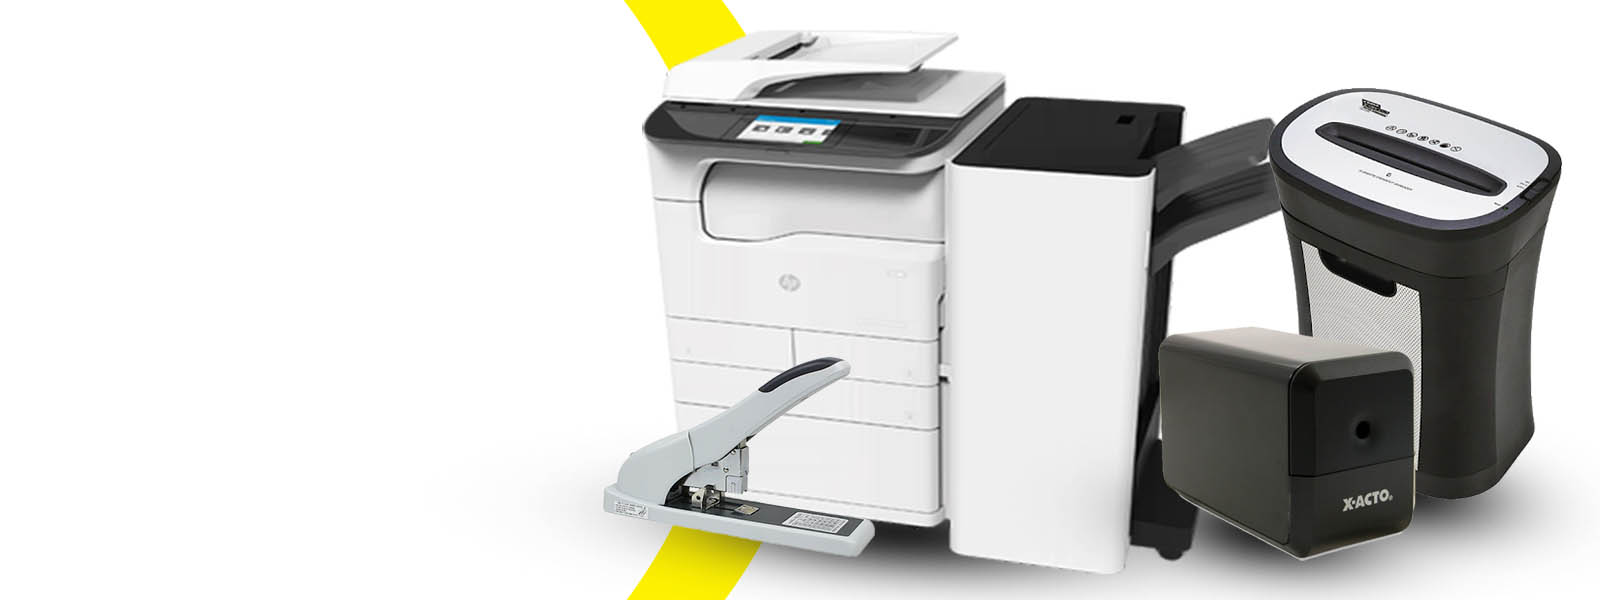 Ecoon Web Banner-#2Office Machines